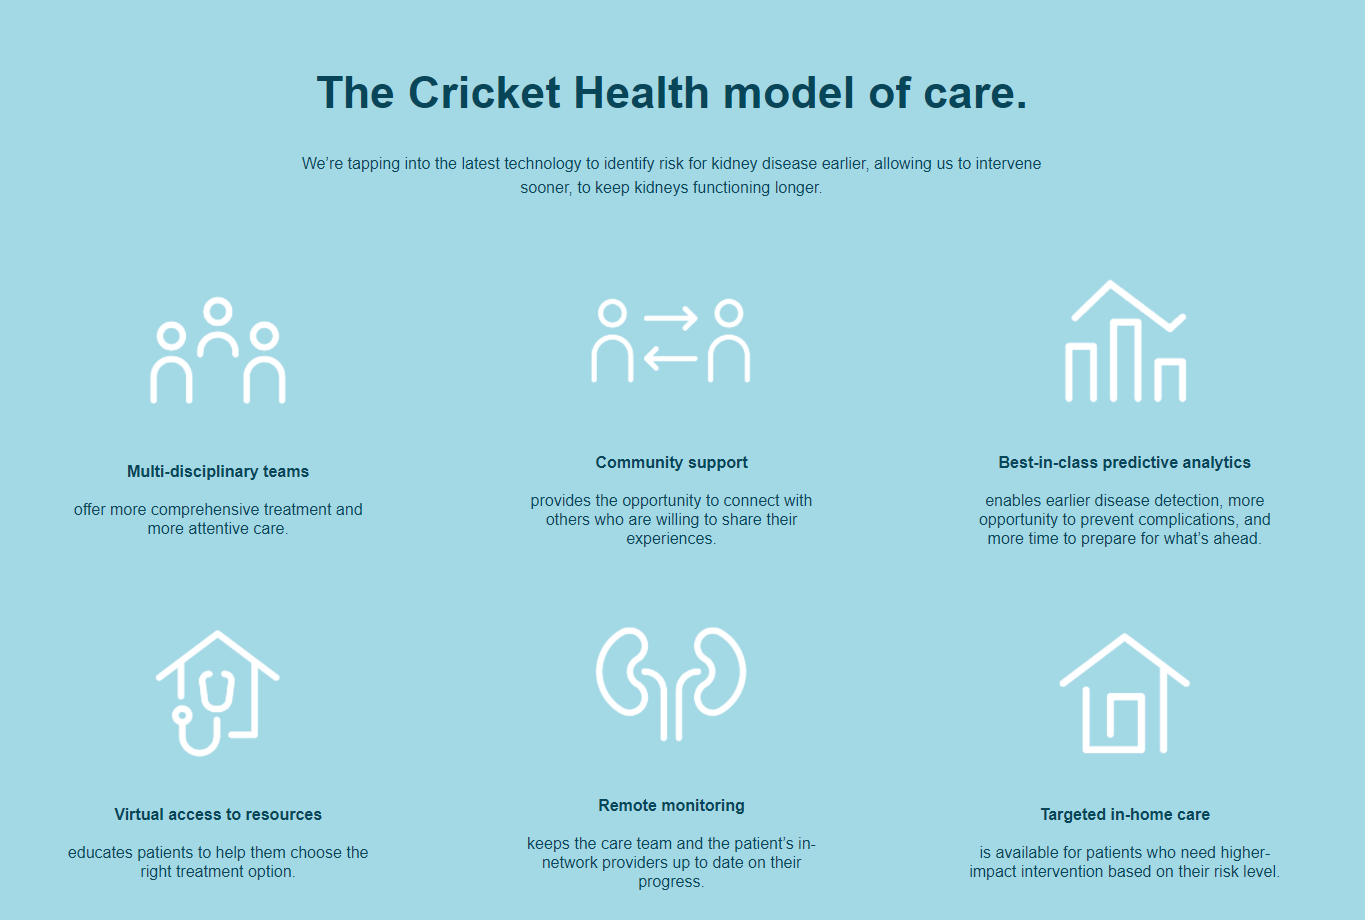 Cricket Health Secures $83.5M to Expand Value-Based Kidney Care Model to Health Plans